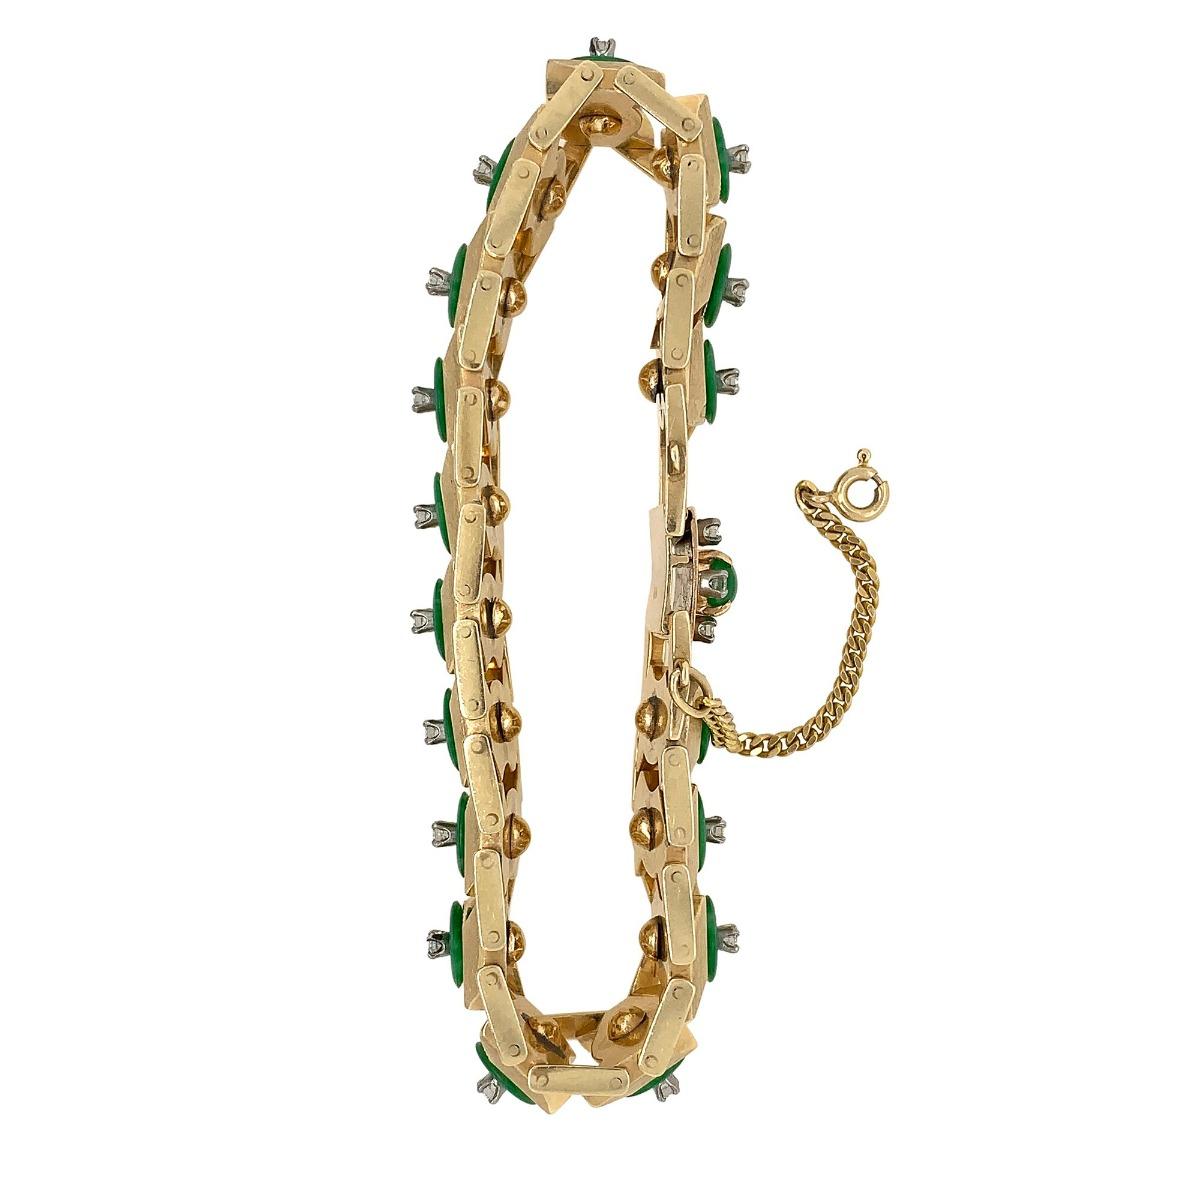 Metal: 14k Yellow Gold
Condition: Excellent
Year of Manufacture: 1940s
Gemstone: Diamond, Jadeite
Diamond Cut: Round Brilliant Cut
Diamond Weight: 1 CT
Item Weight: 43.6 grams
Length: 7.1 inches

SKU#B-00984